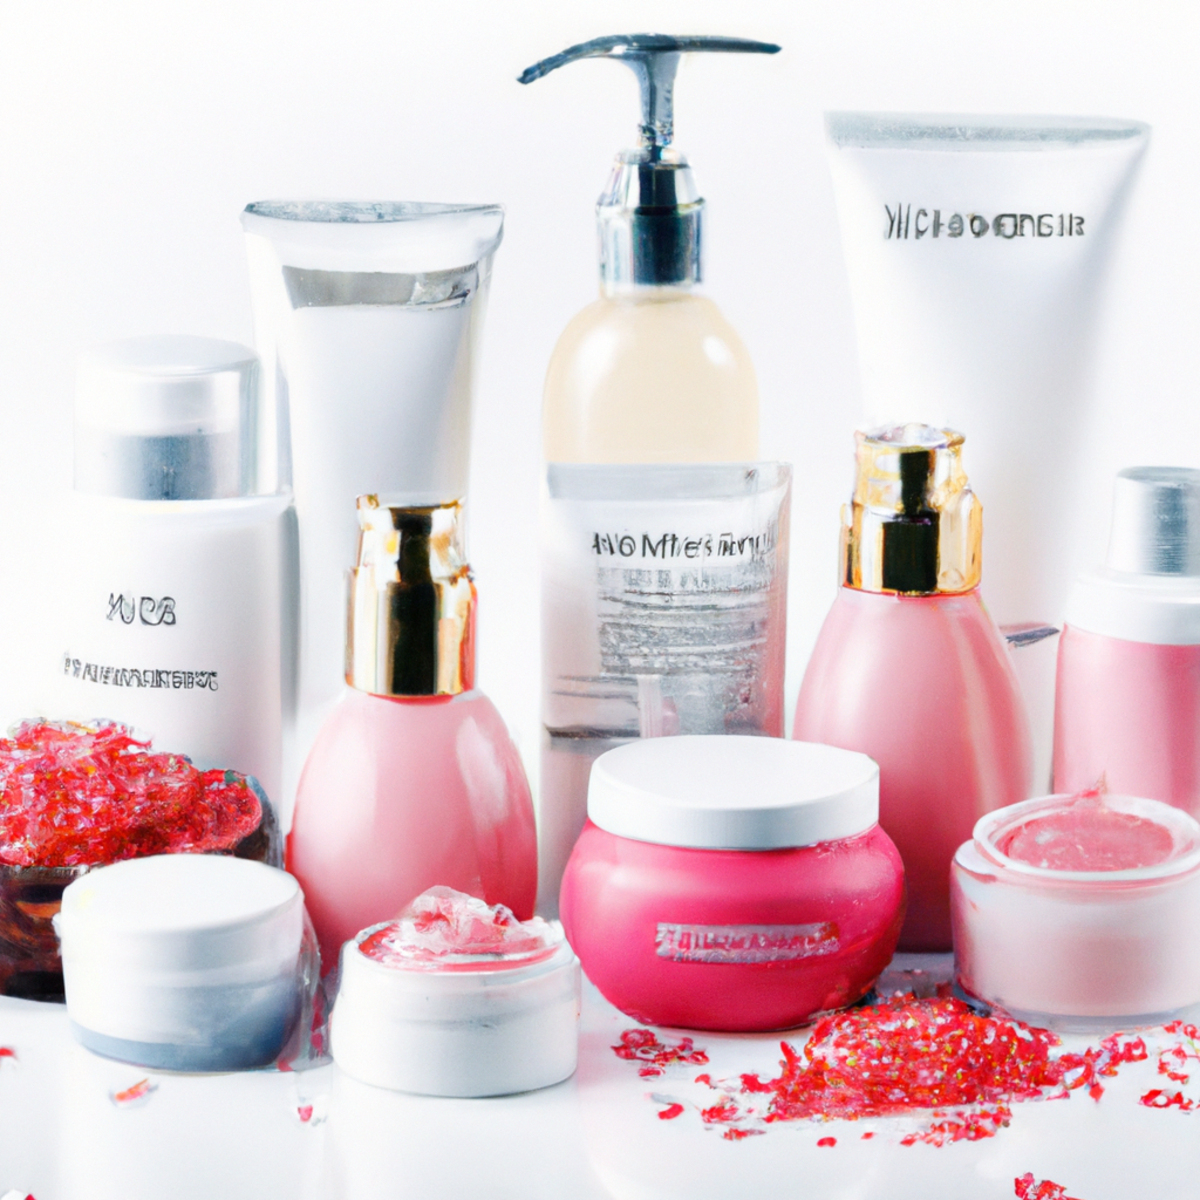 Vibrant assortment of skincare products for rosacea management on a clean white background.